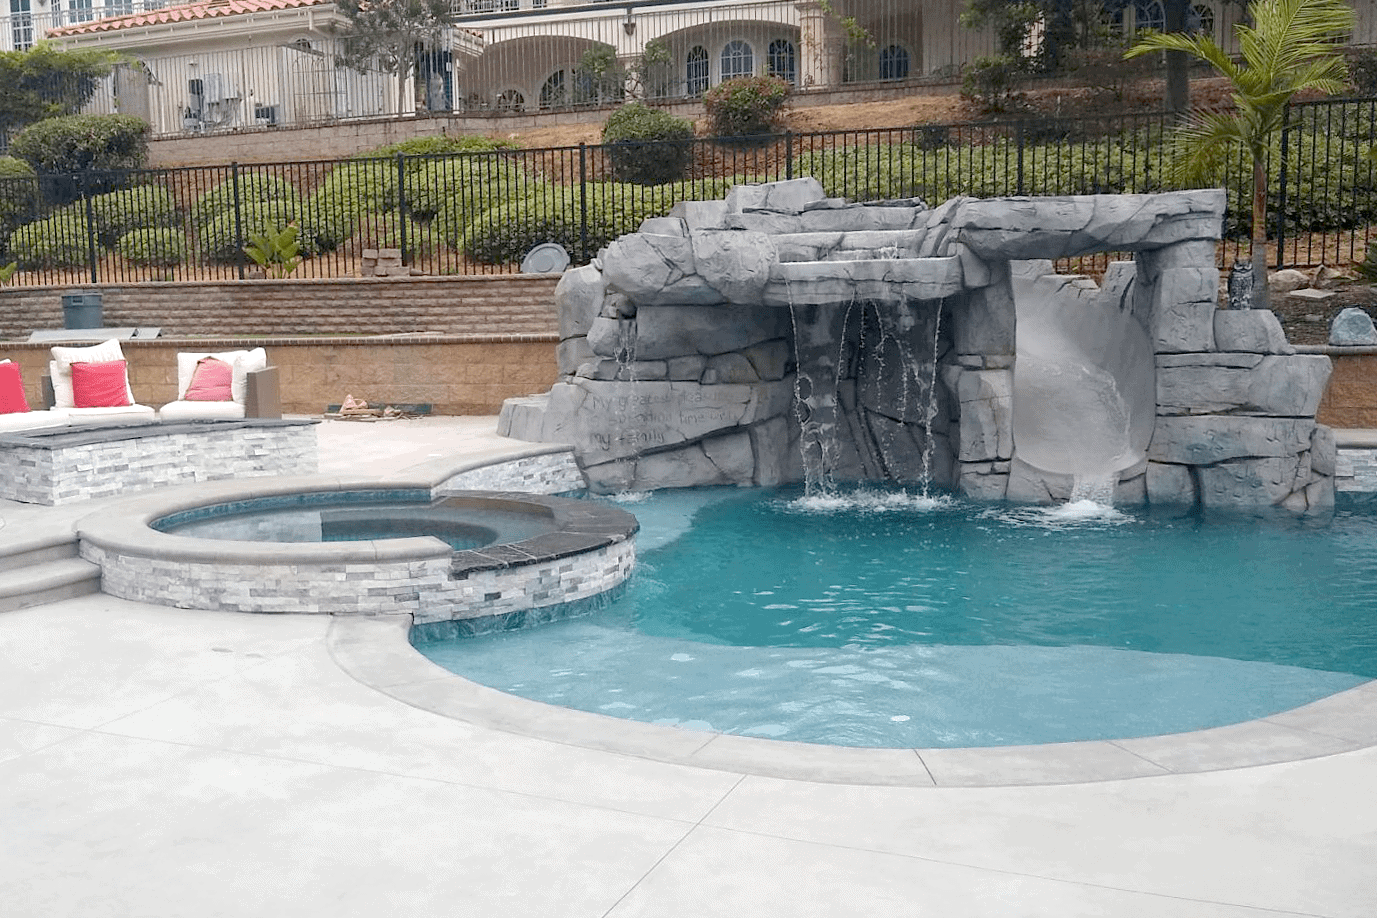 Remodeling Swimming Pool, house with Swimming Pool, Swimming Pool